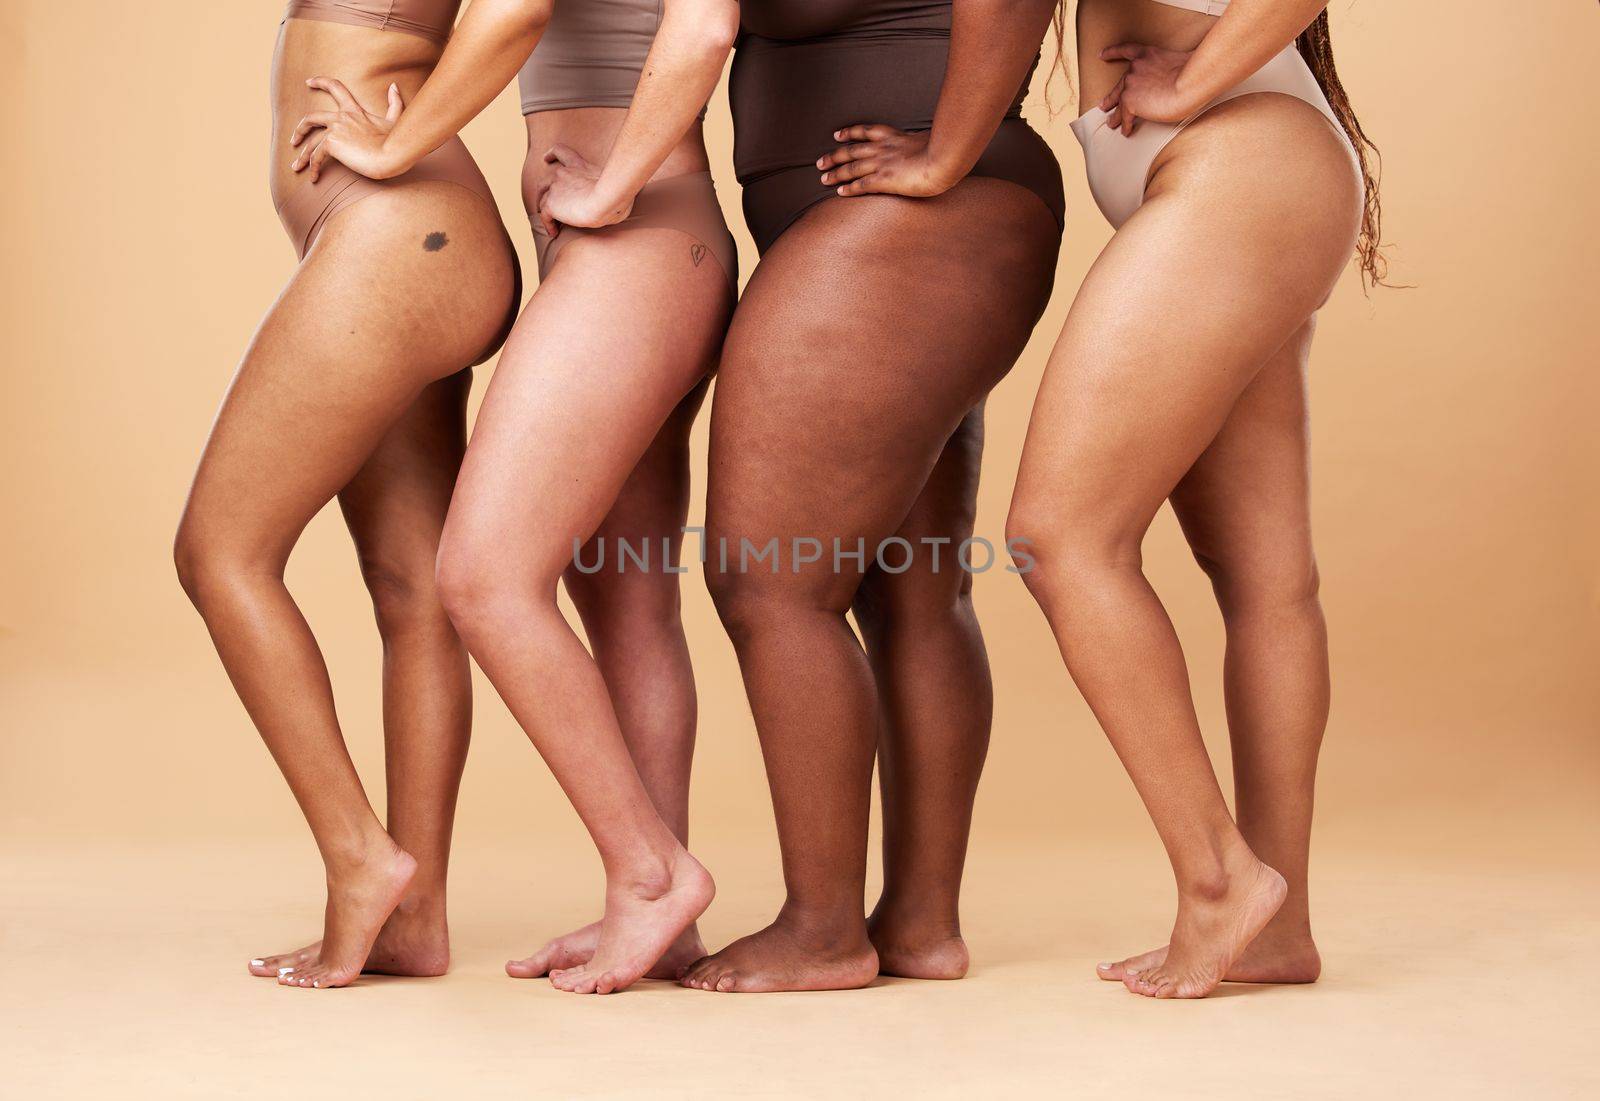 Diversity women, legs and different body and skin of group together for inclusion, beauty and power. Underwear model people on beige background with cellulite, pride and motivation for self love.